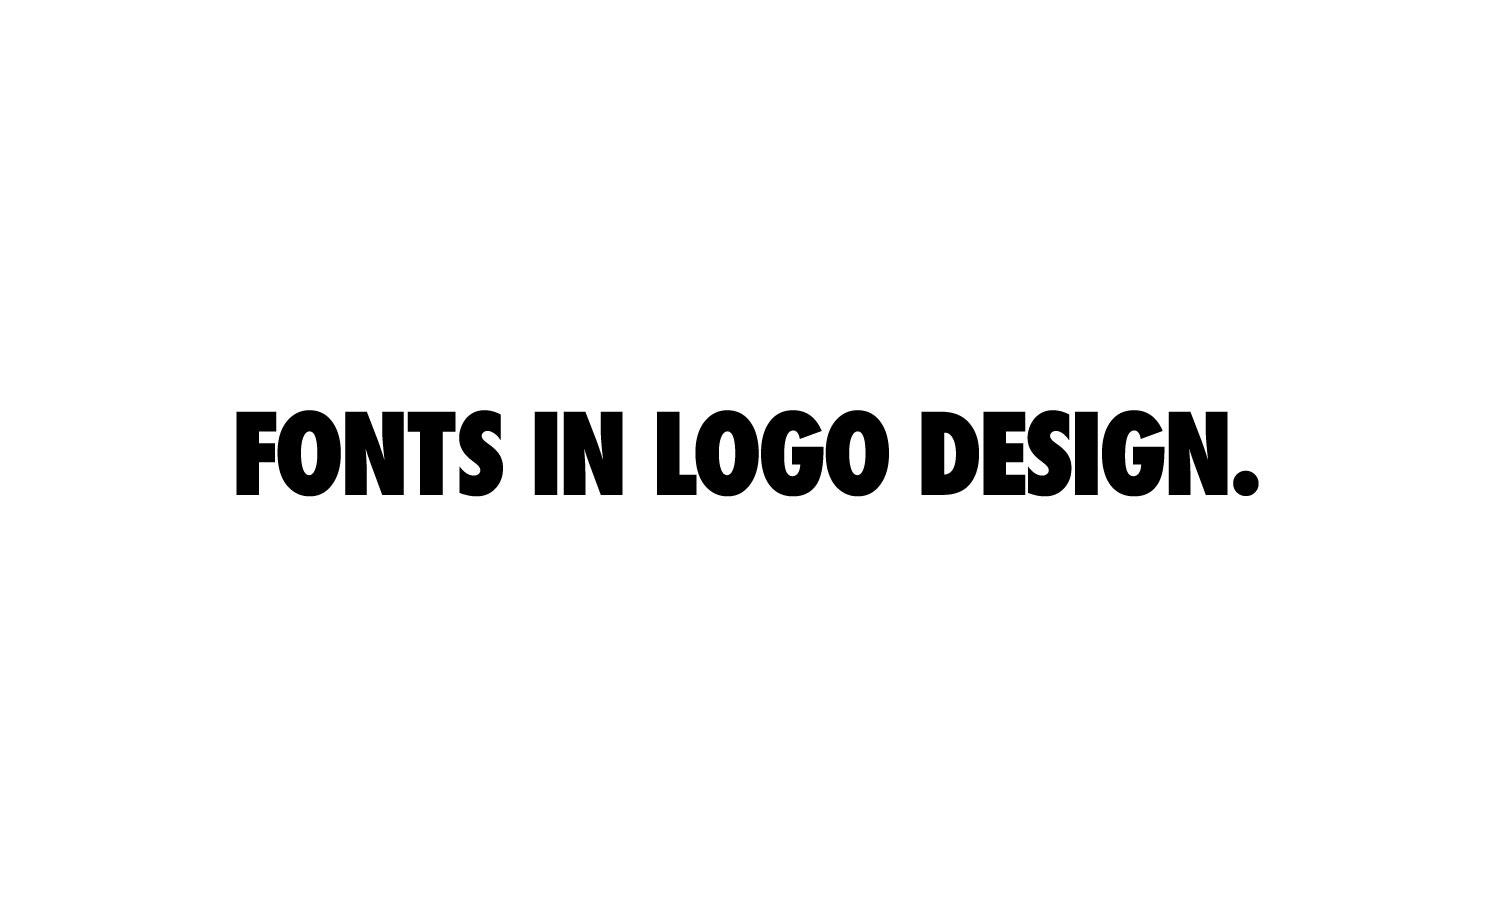 Solid Brand Logo - 10 Solid Fonts Used in Logo Design (Bud Light Font to Nike) Hook Agency